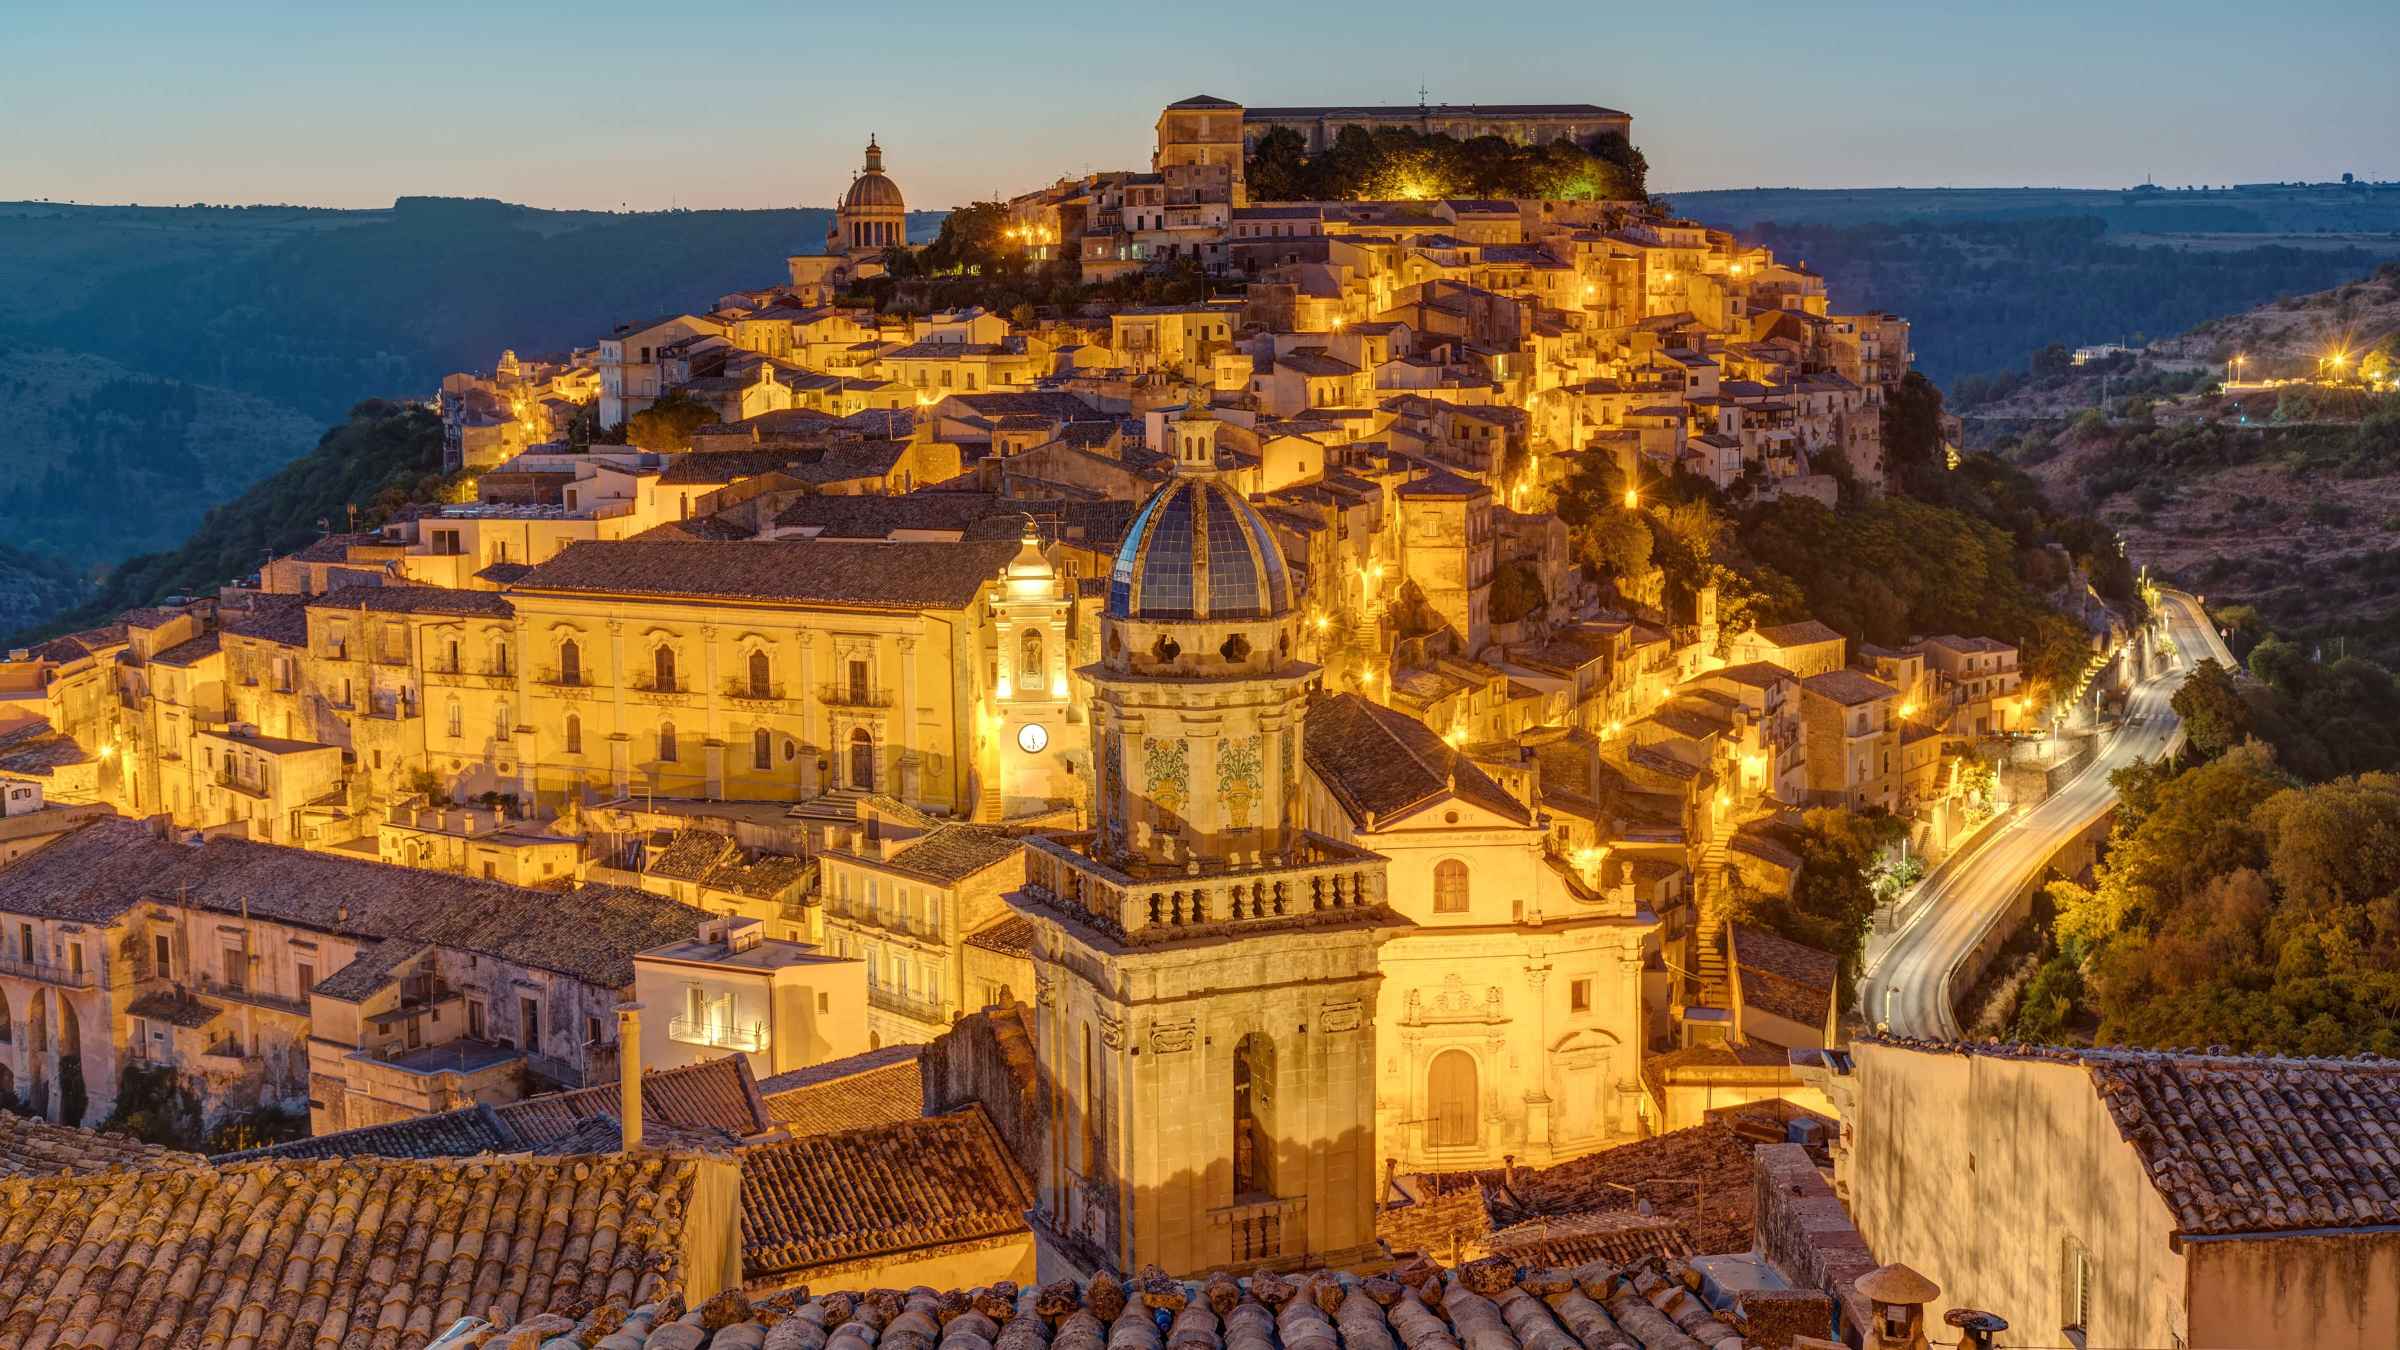 Ragusa 21 Top 10 Tours Activities With Photos Things To Do In Ragusa Italy Getyourguide